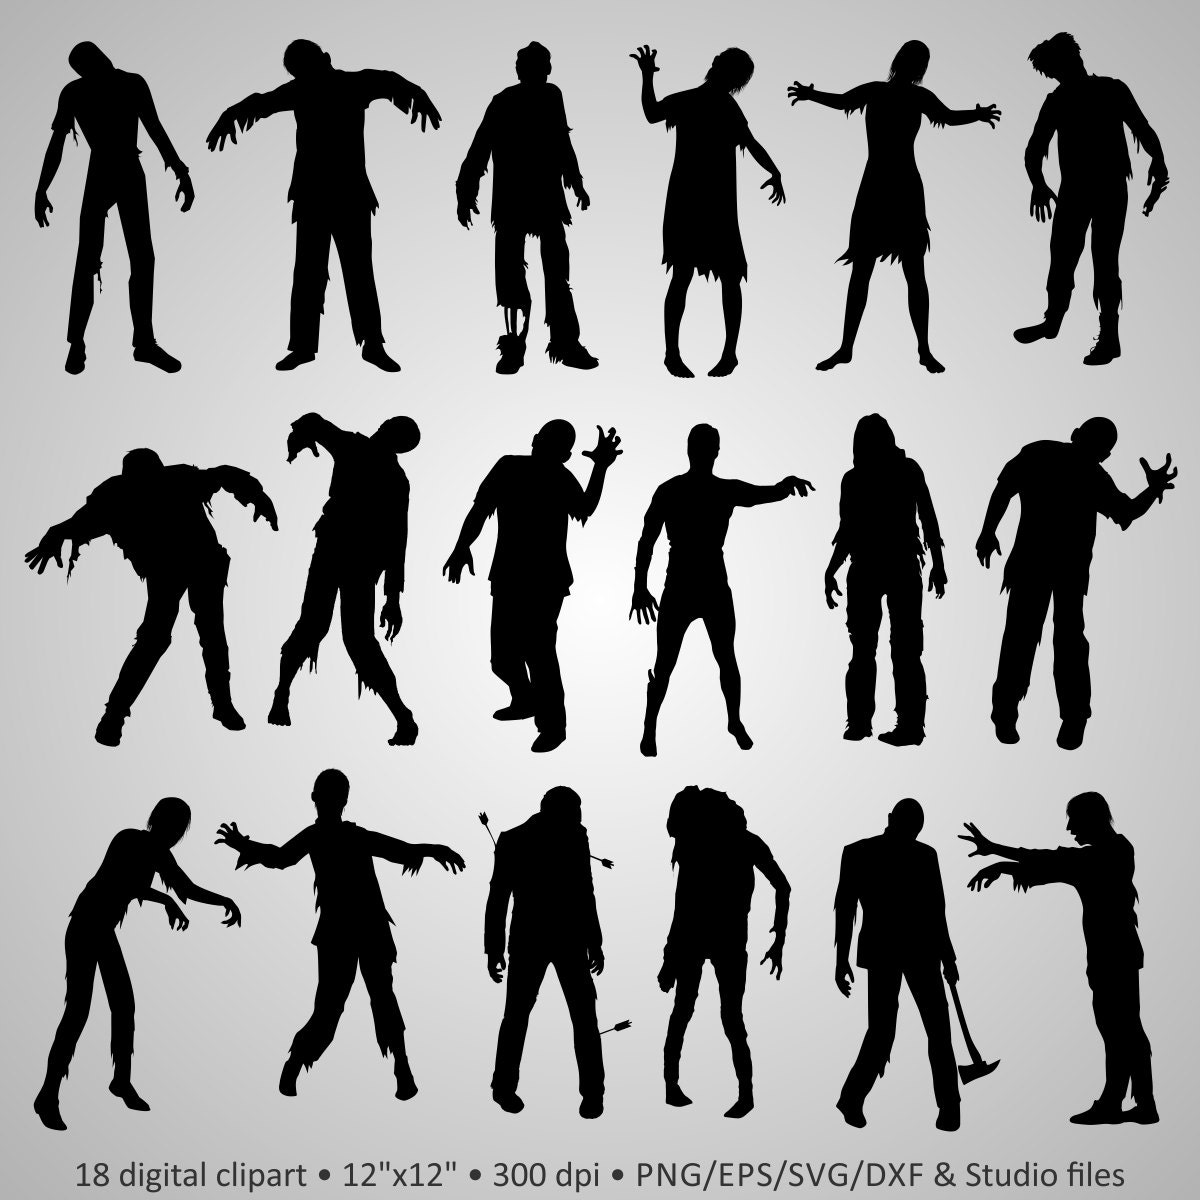 Buy 2 Get 1 Free Digital Clipart Zombie Silhouettes walking